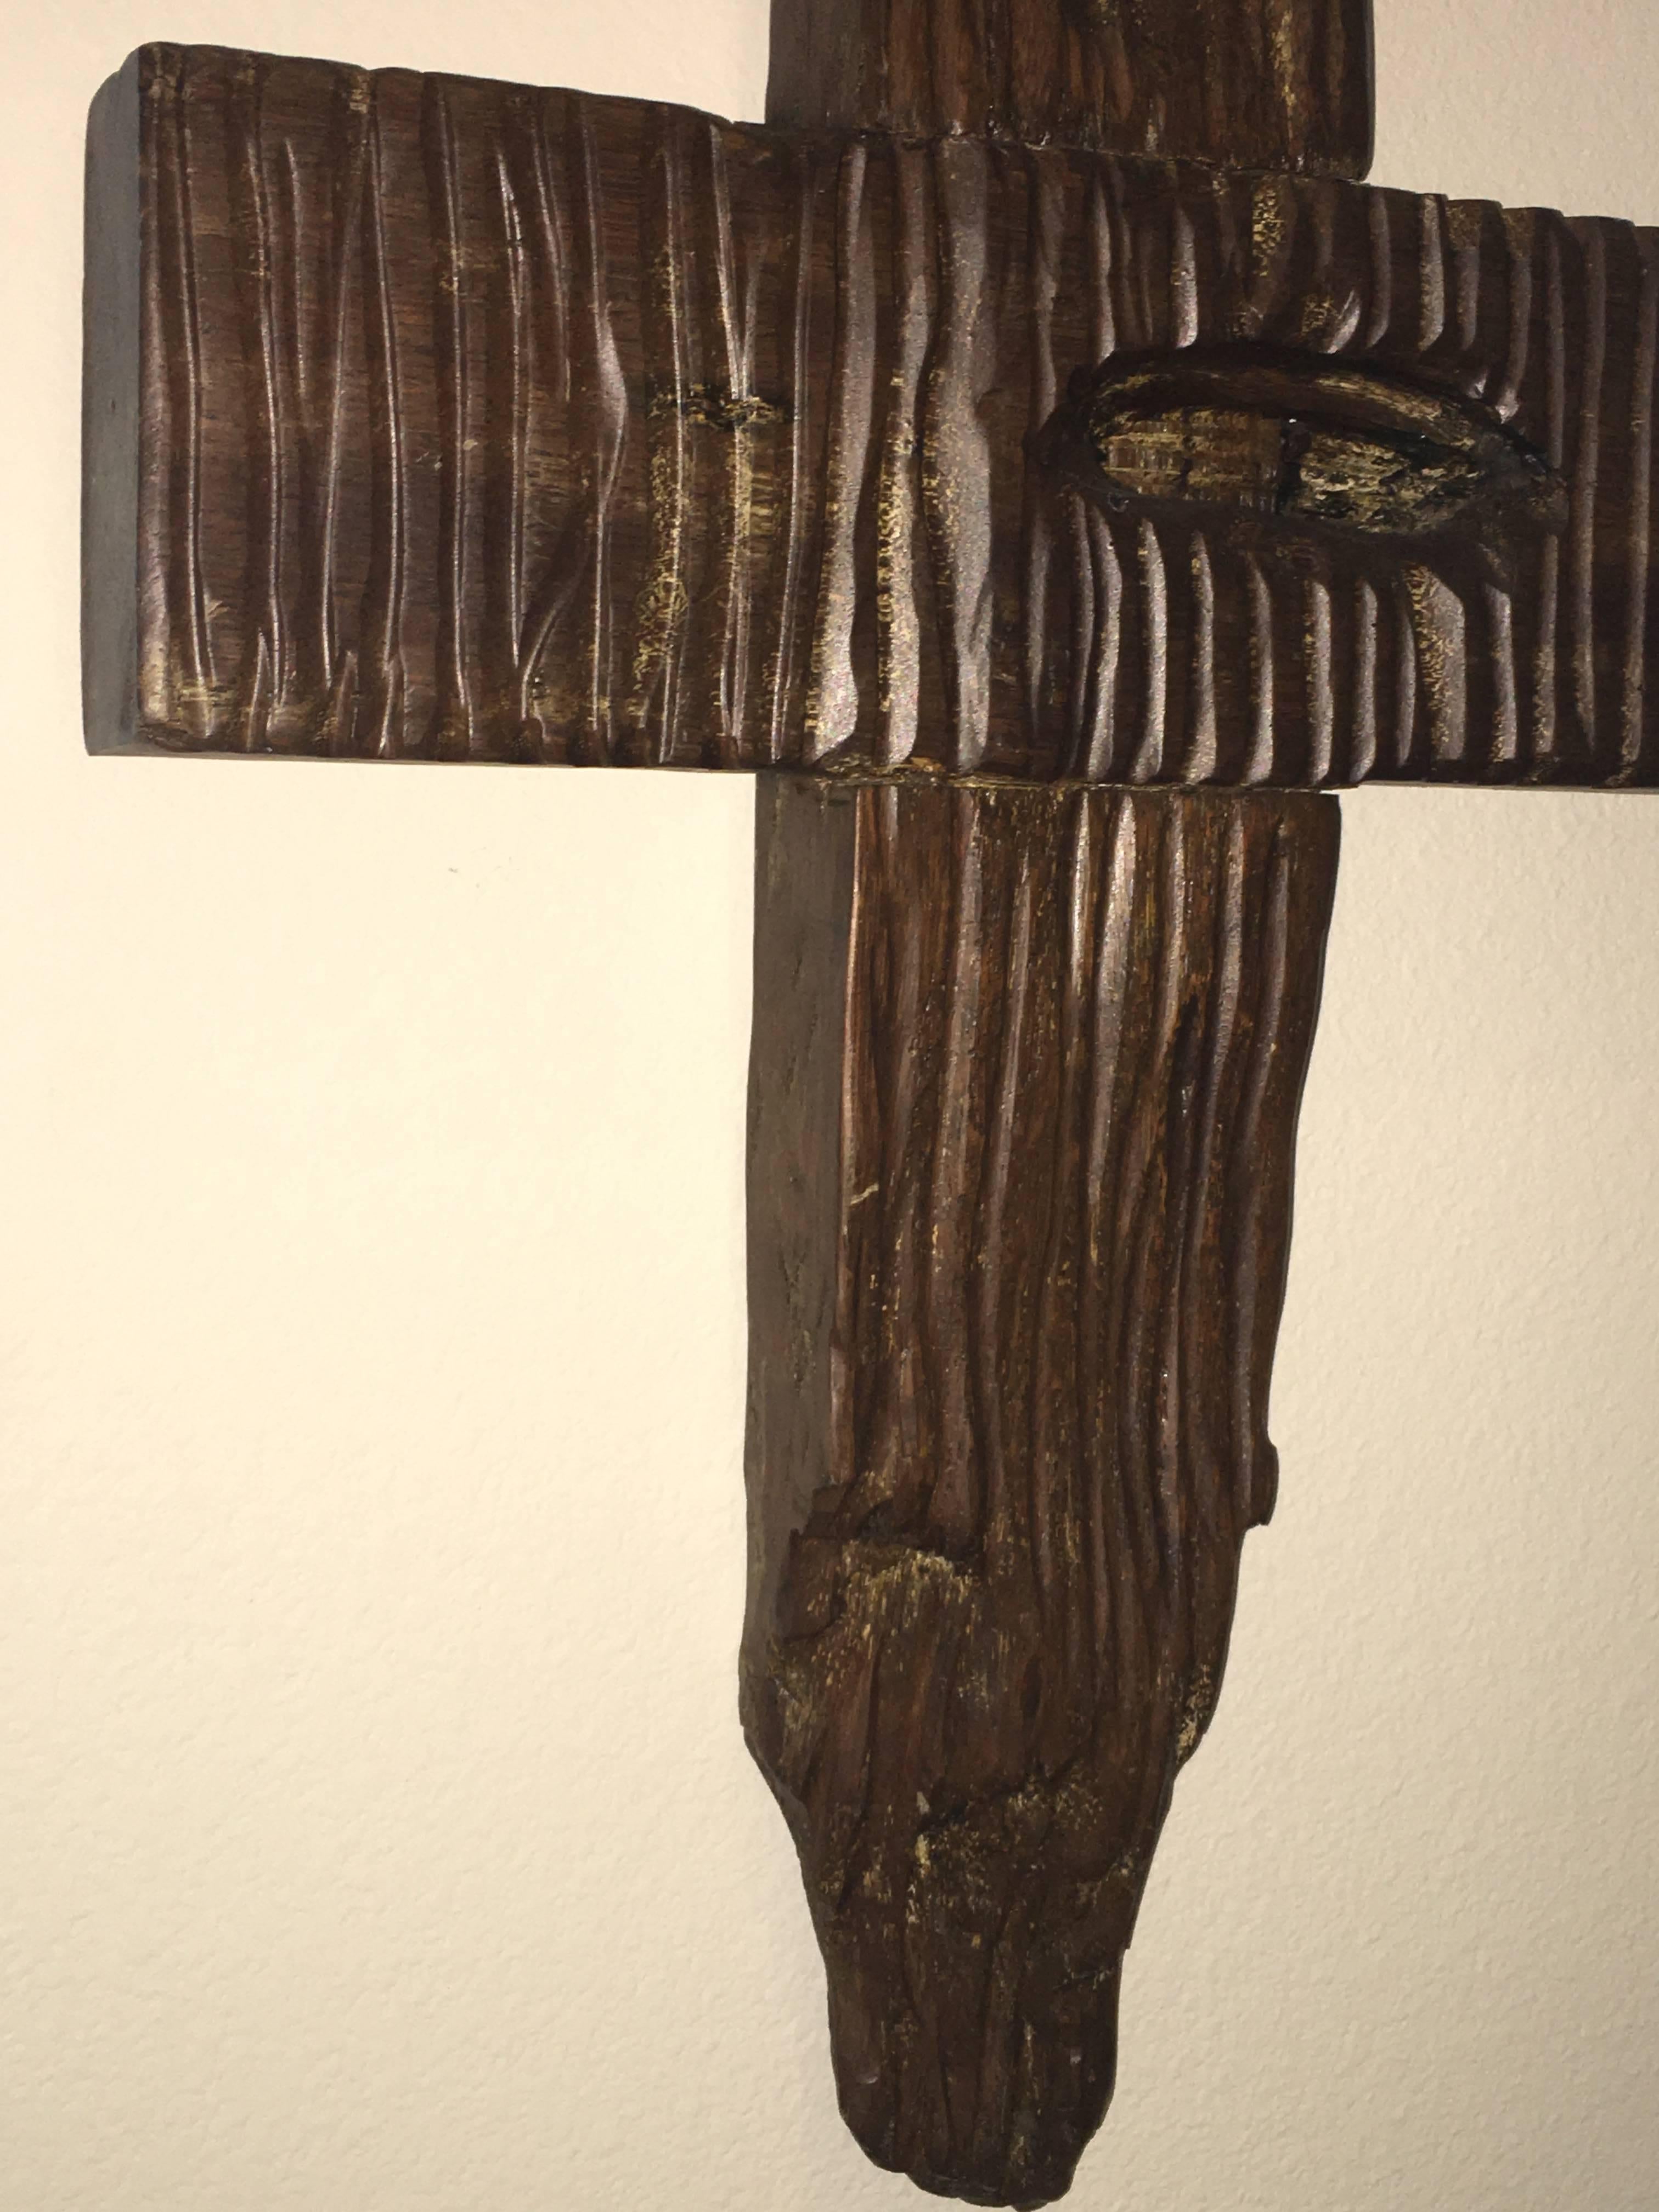 Beautiful wood carving by an El Salvadorian artist.
Hardwood (probably teakwood), live edge or Brutalist style. Drift or barn wood. Signed by the artist.